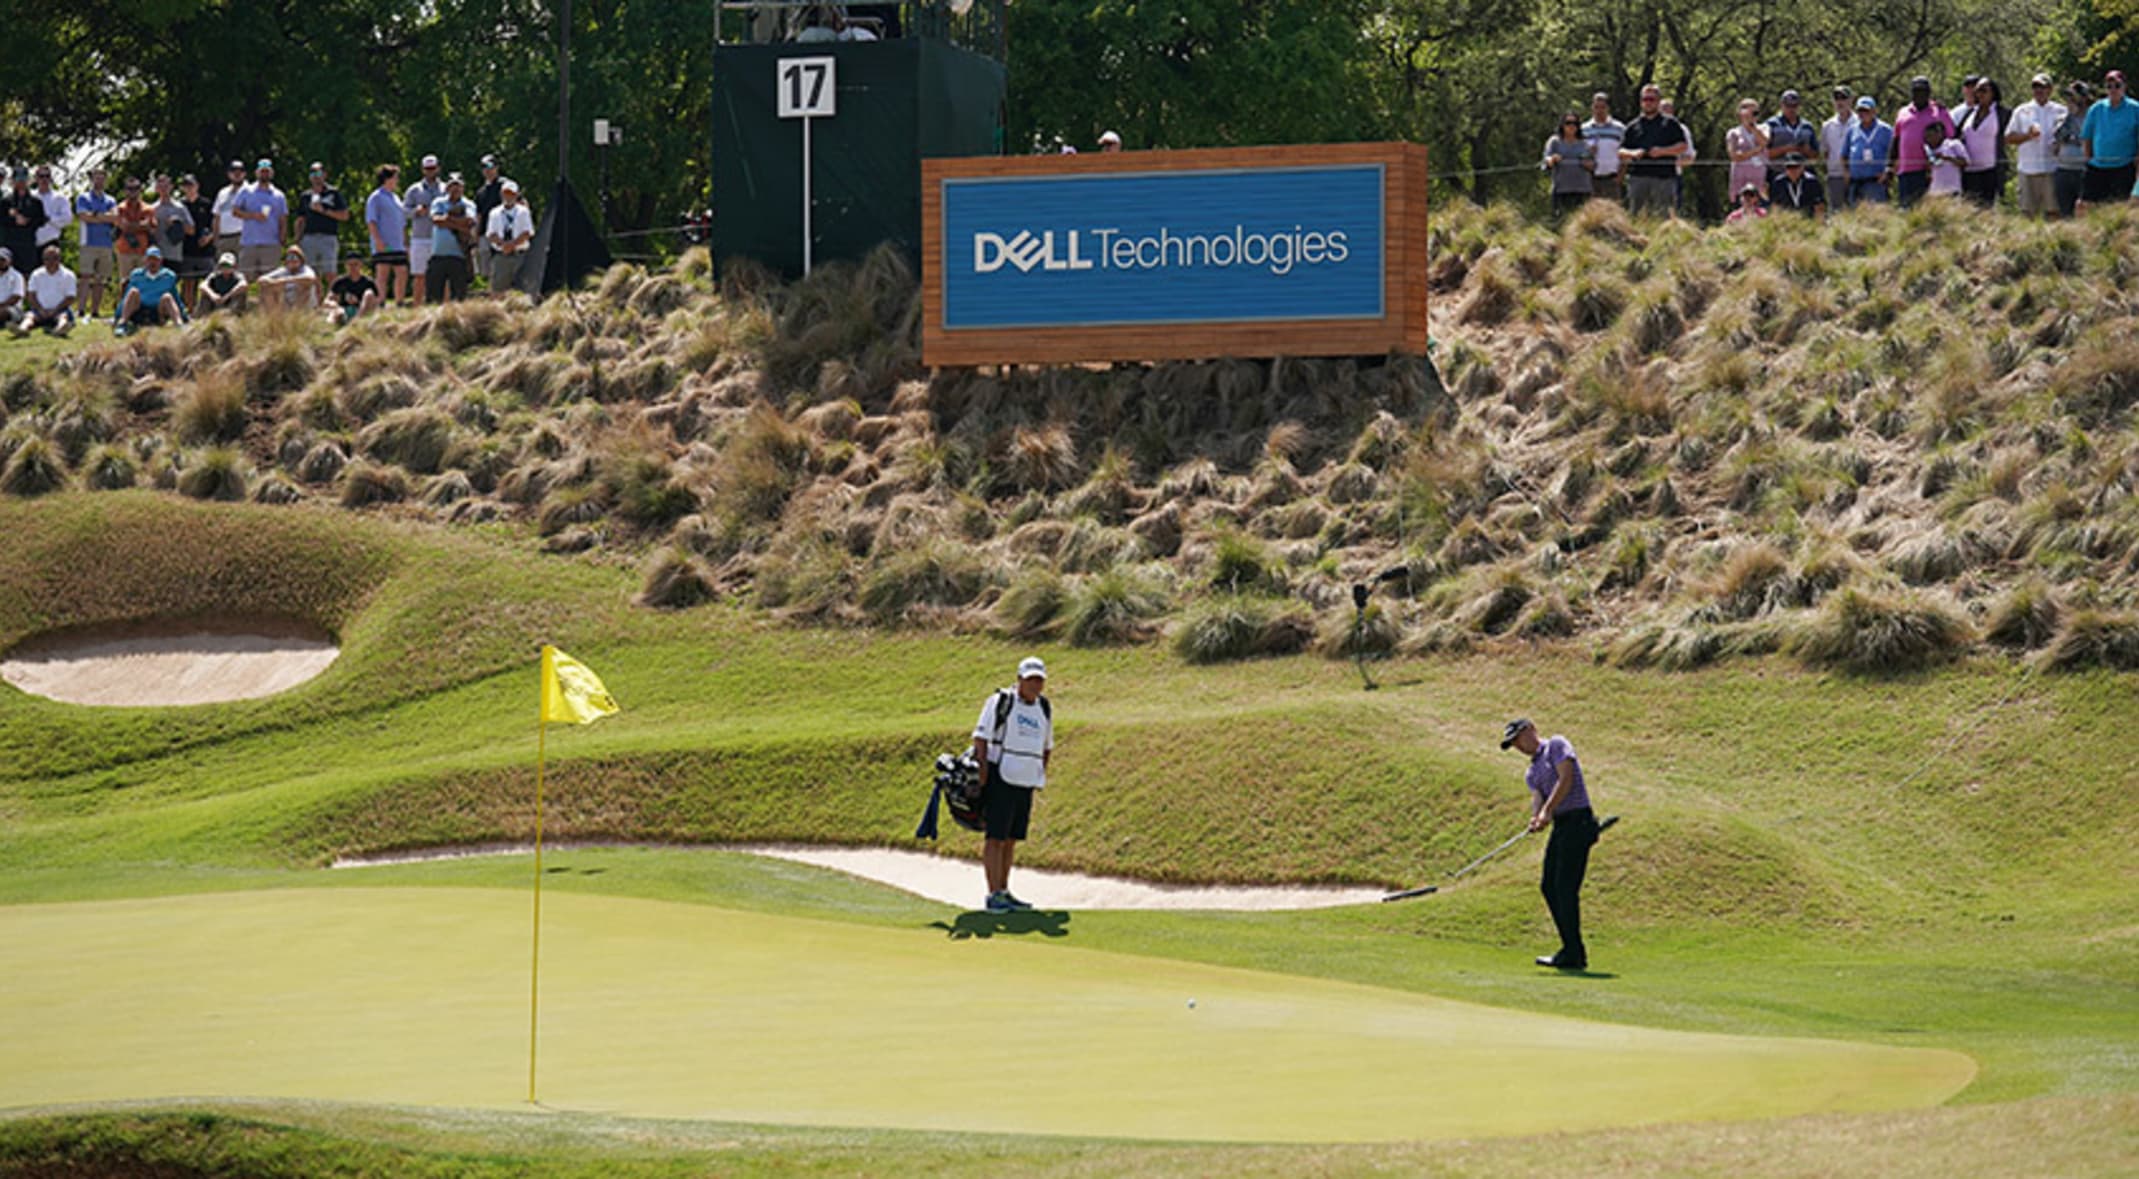 wgc dell match play watch live